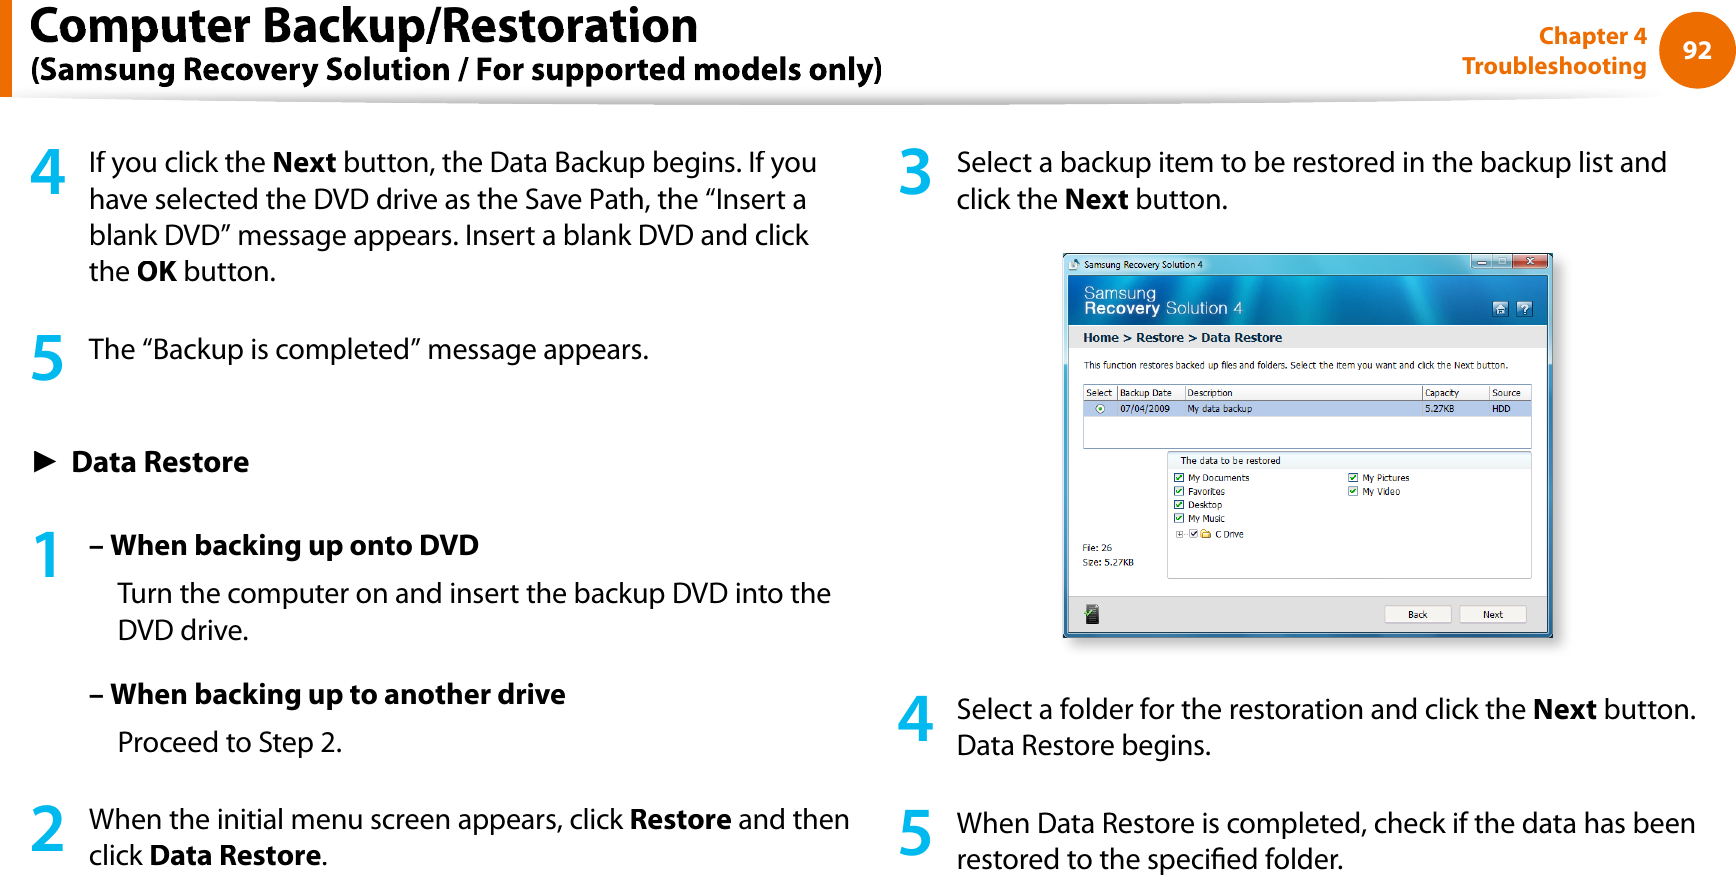 92Chapter 4Troubleshooting4If you click theNext button, the Data Backup begins. If youhave selected the DVD drive as the Save Path, the “Insert ablank DVD” message appears. Insert a blank DVD and click theOK button.K5The “Backup is completed” message appears.ŹData Restore1– When backing up onto DVDTurn the computer on and insert the backup DVD into theDVD drive.–When backing up to another driveProceed to Step 2.2When the initial menu screen appears, click Restore and thenclick Data Restore.3Select a backup item to be restored in the backup list andclick theNext button.4Select a folder for the restoration and click theNext button.Data Restore begins.5When Data Restore is completed, check if the data has beenrestored to the specied folder.Computer Backup/Restoration